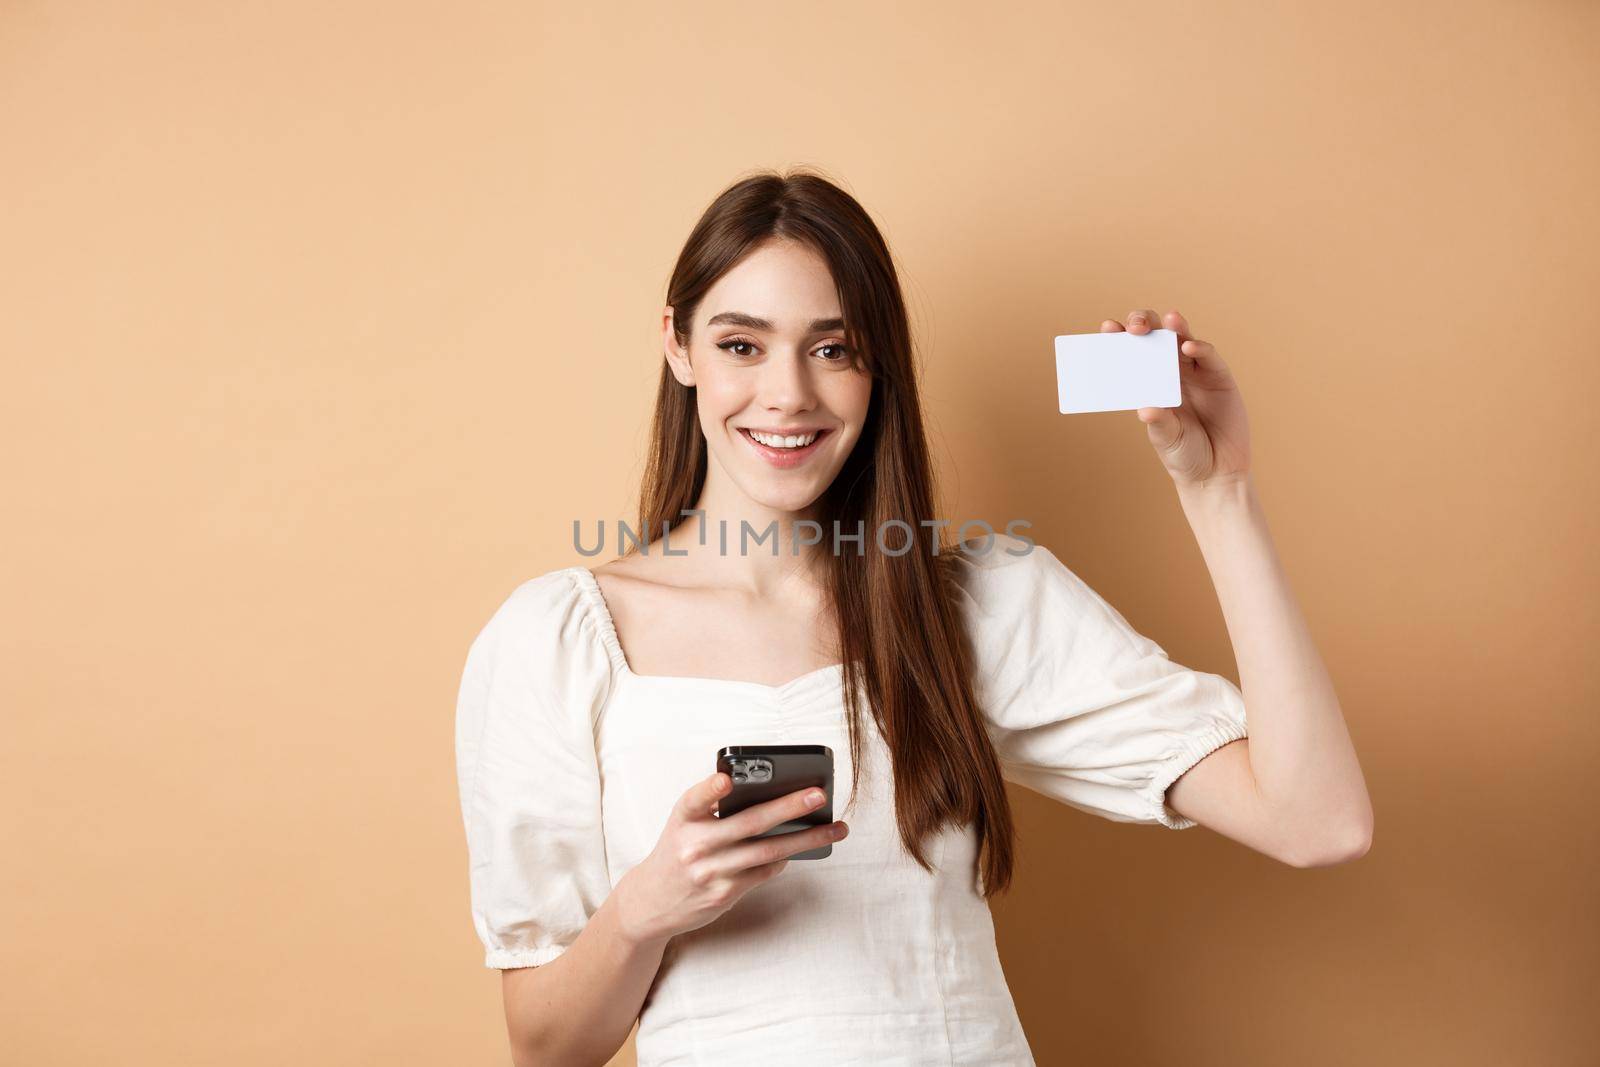 E-commerce concept. Smiling woman showing plastic credit card while shopping online on mobile phone, standing against beige background.